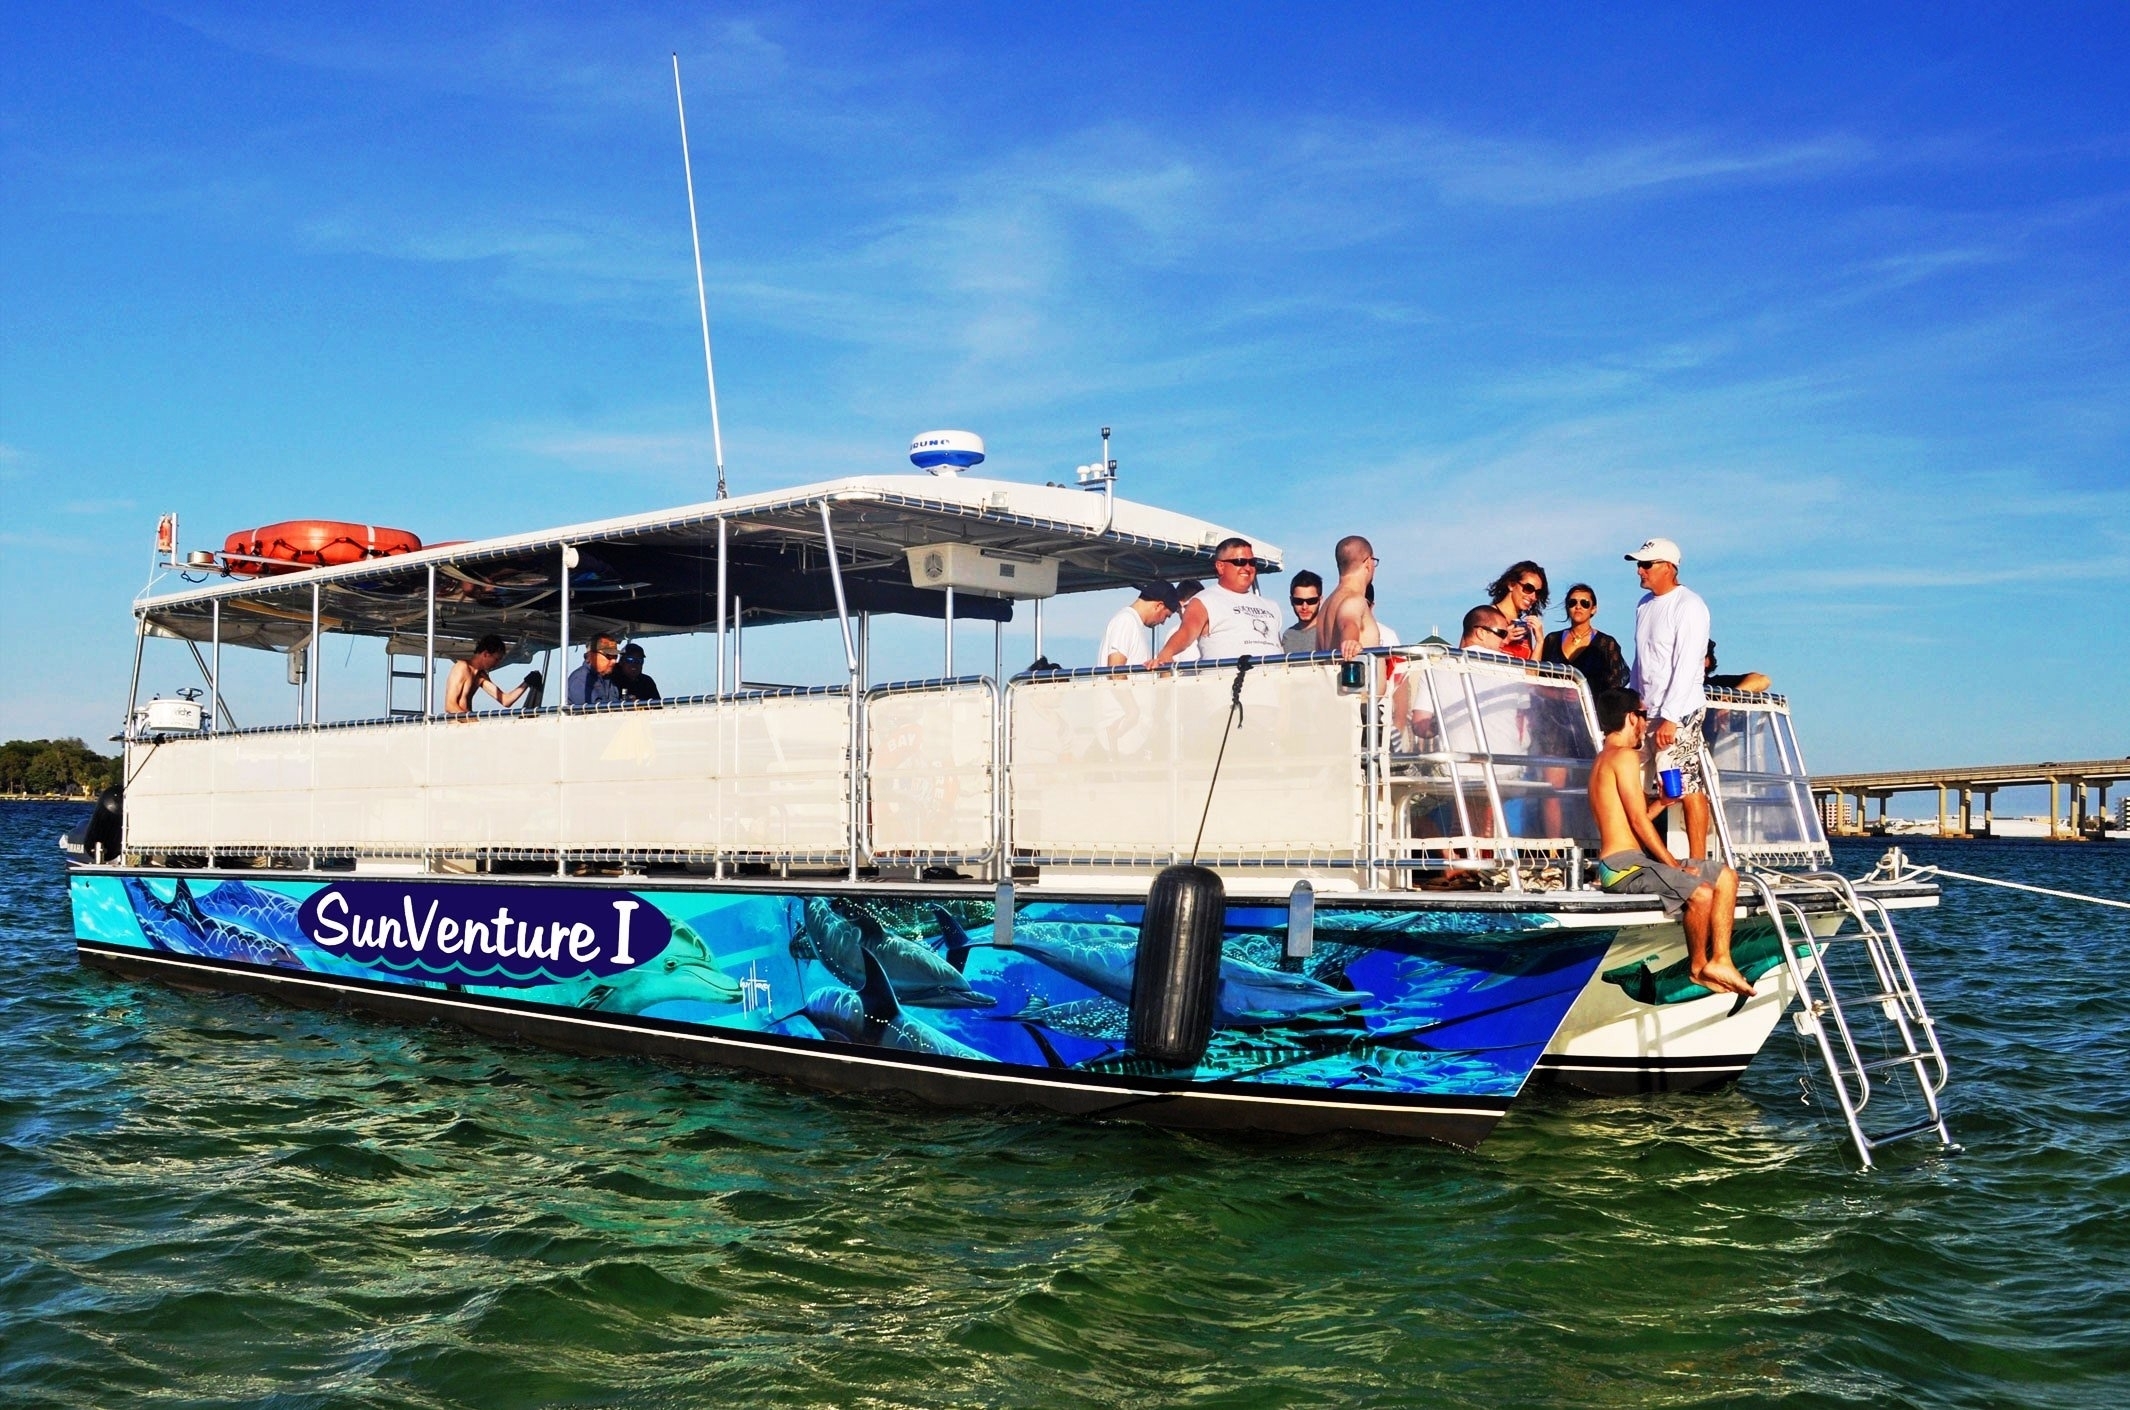 SunVenture dolphin and crab island cruises